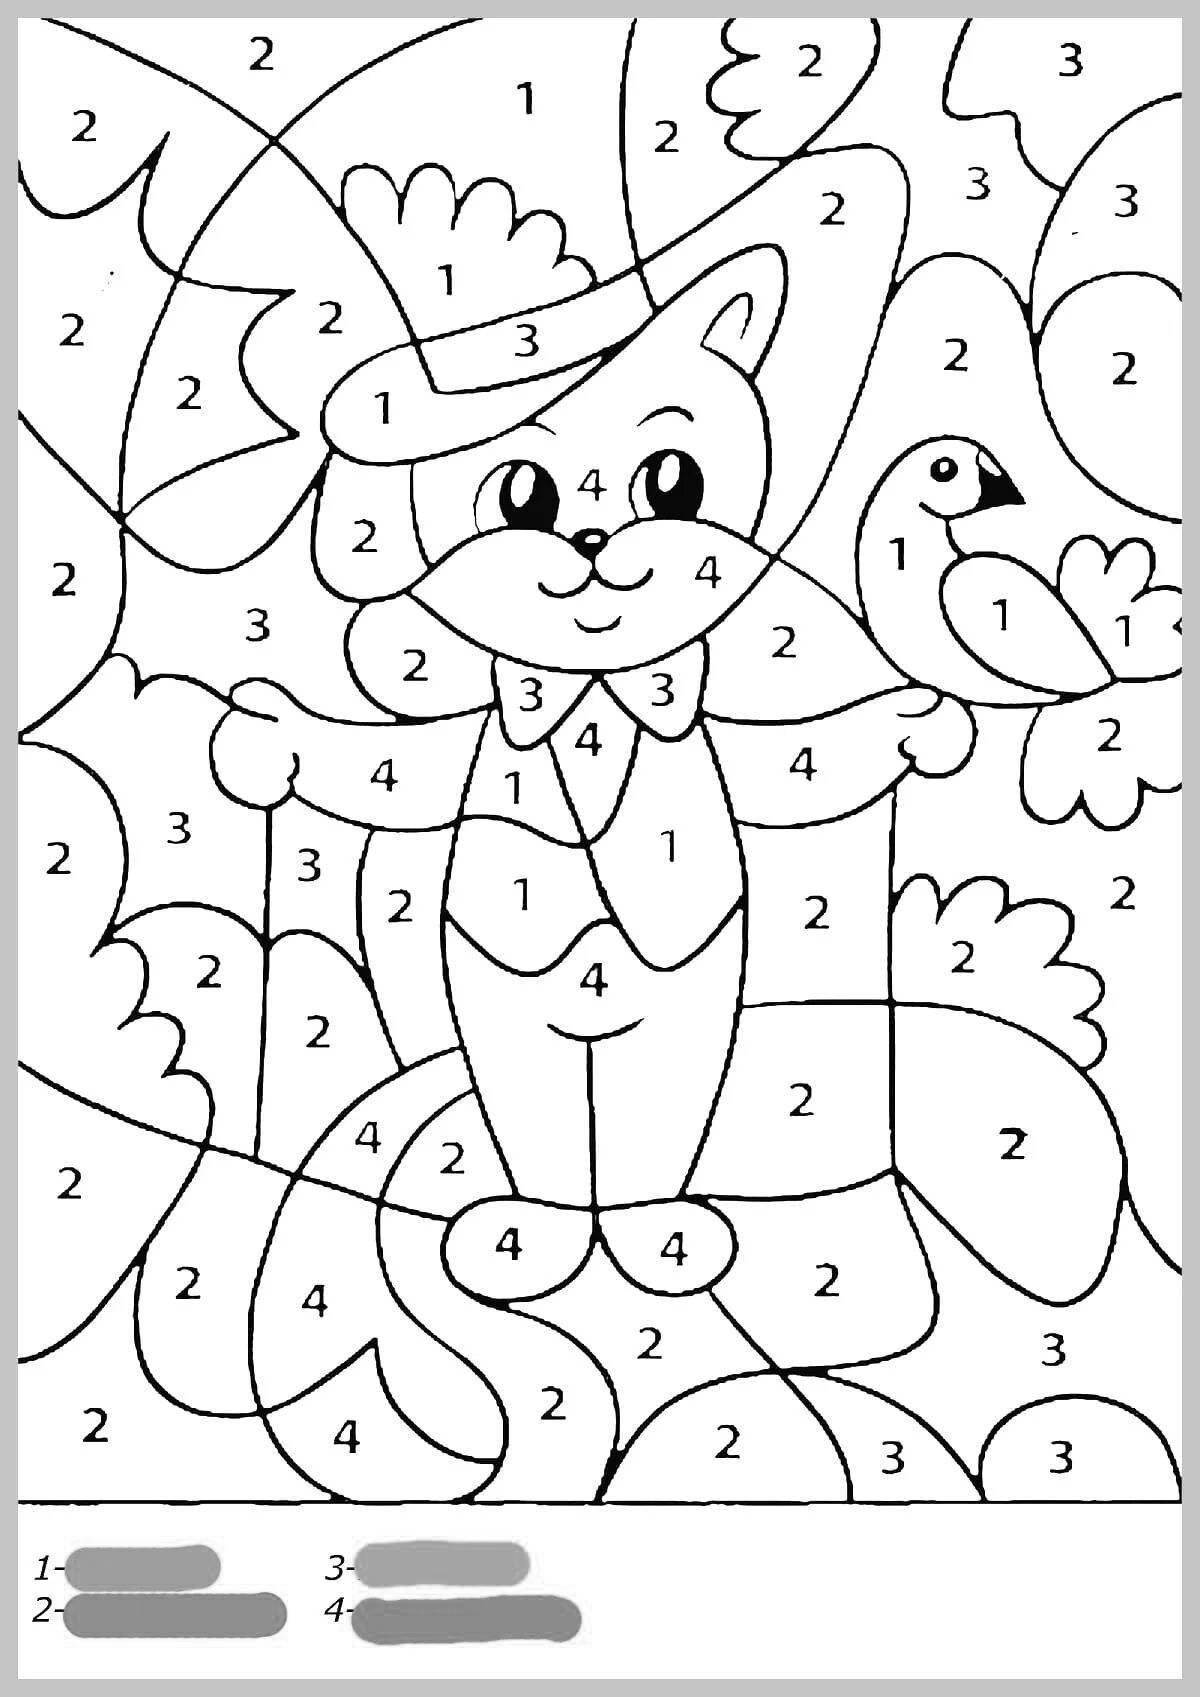 Attractive coloring book for kids